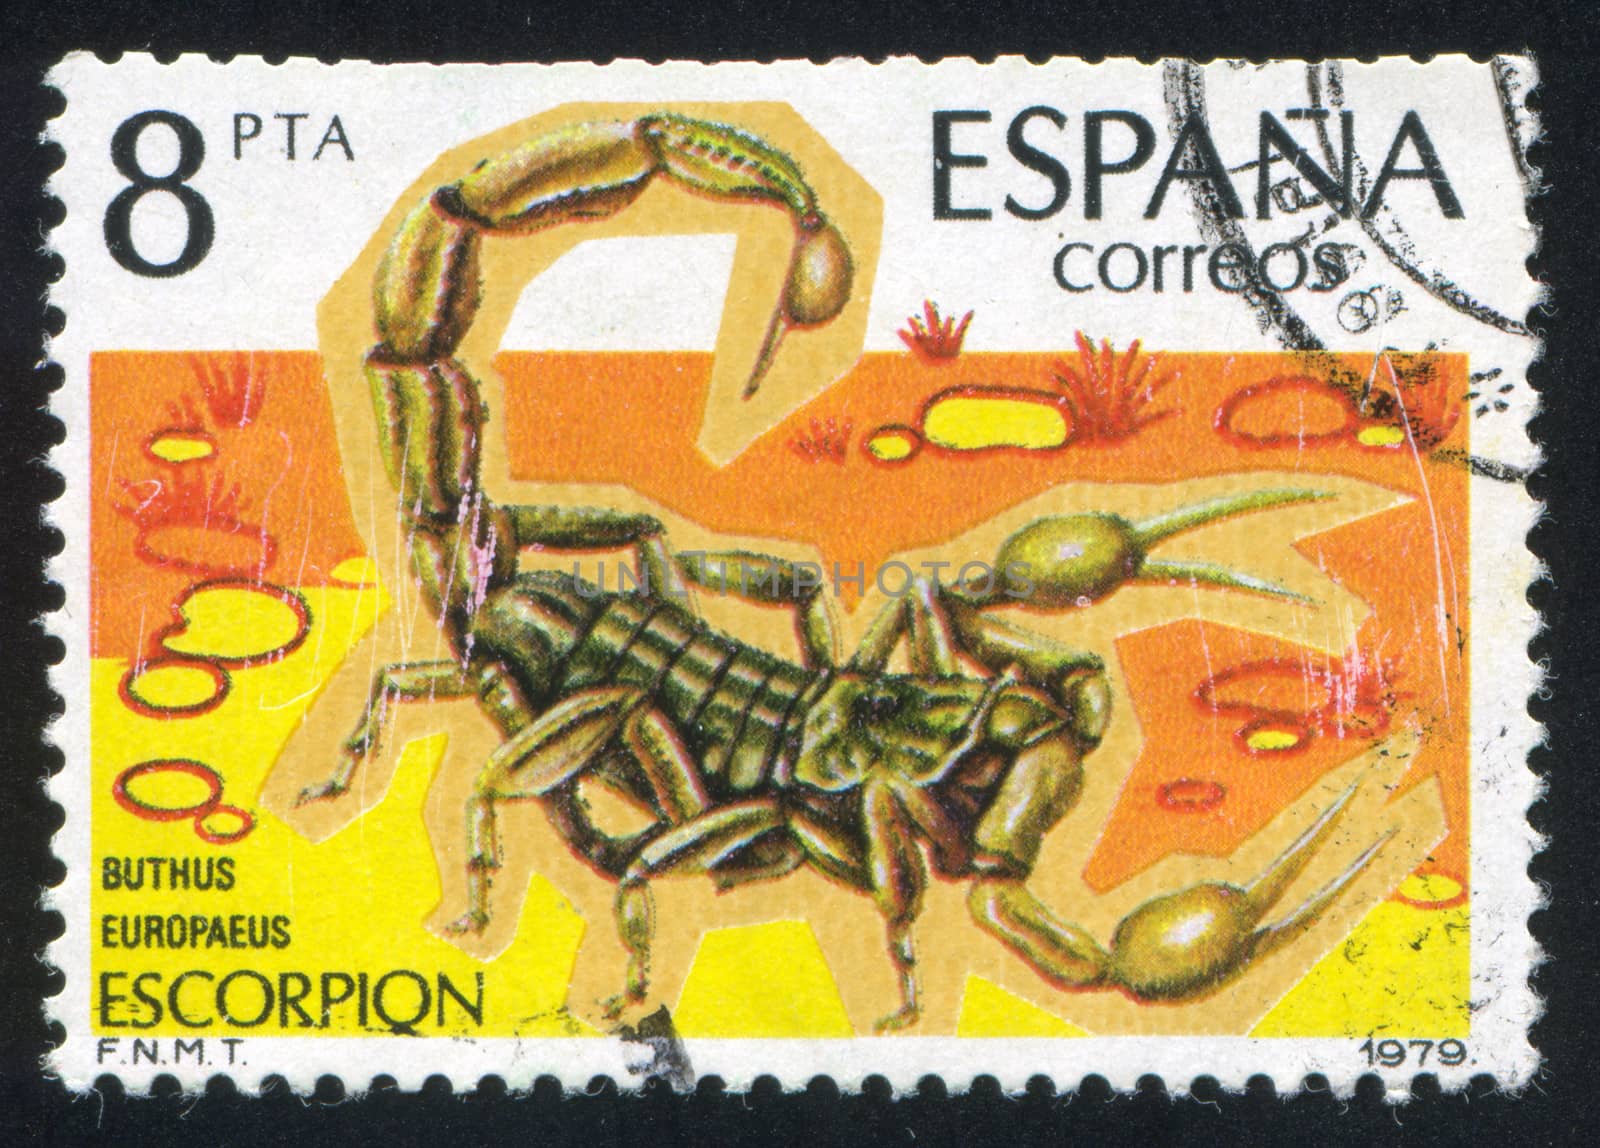 Scorpion by rook